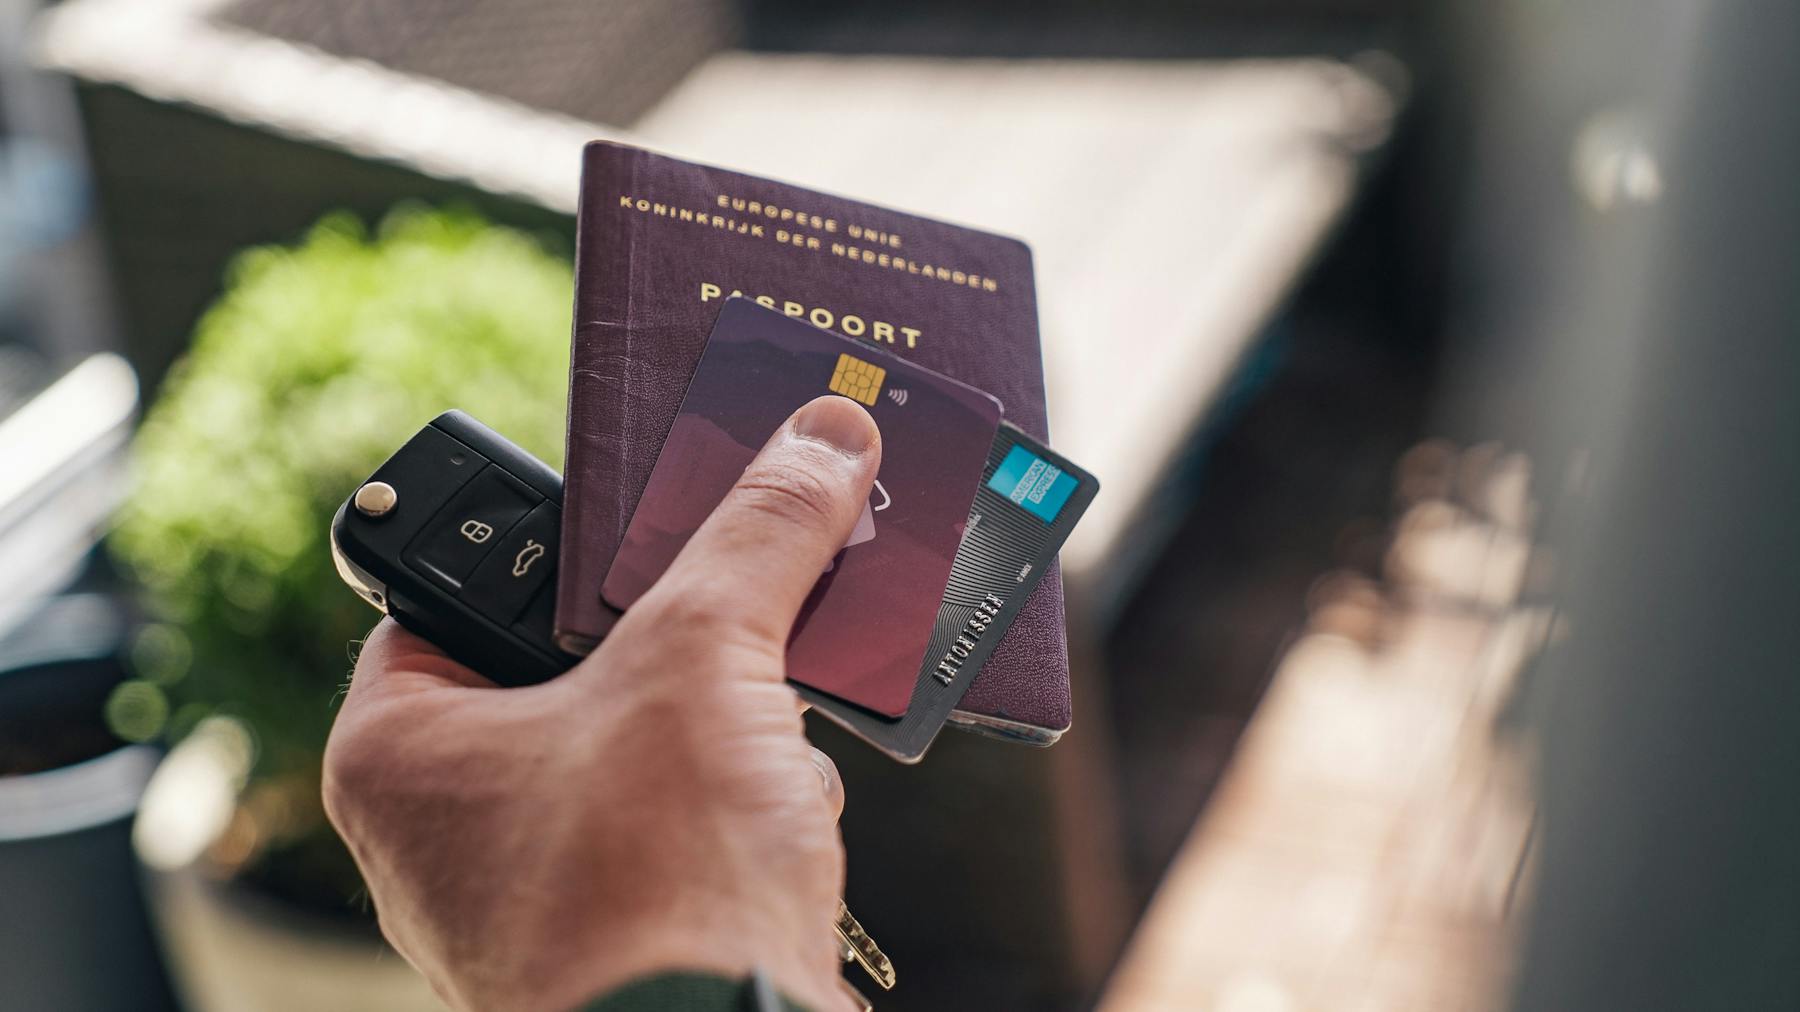 A man's hand holding cards, car keys, and a passport